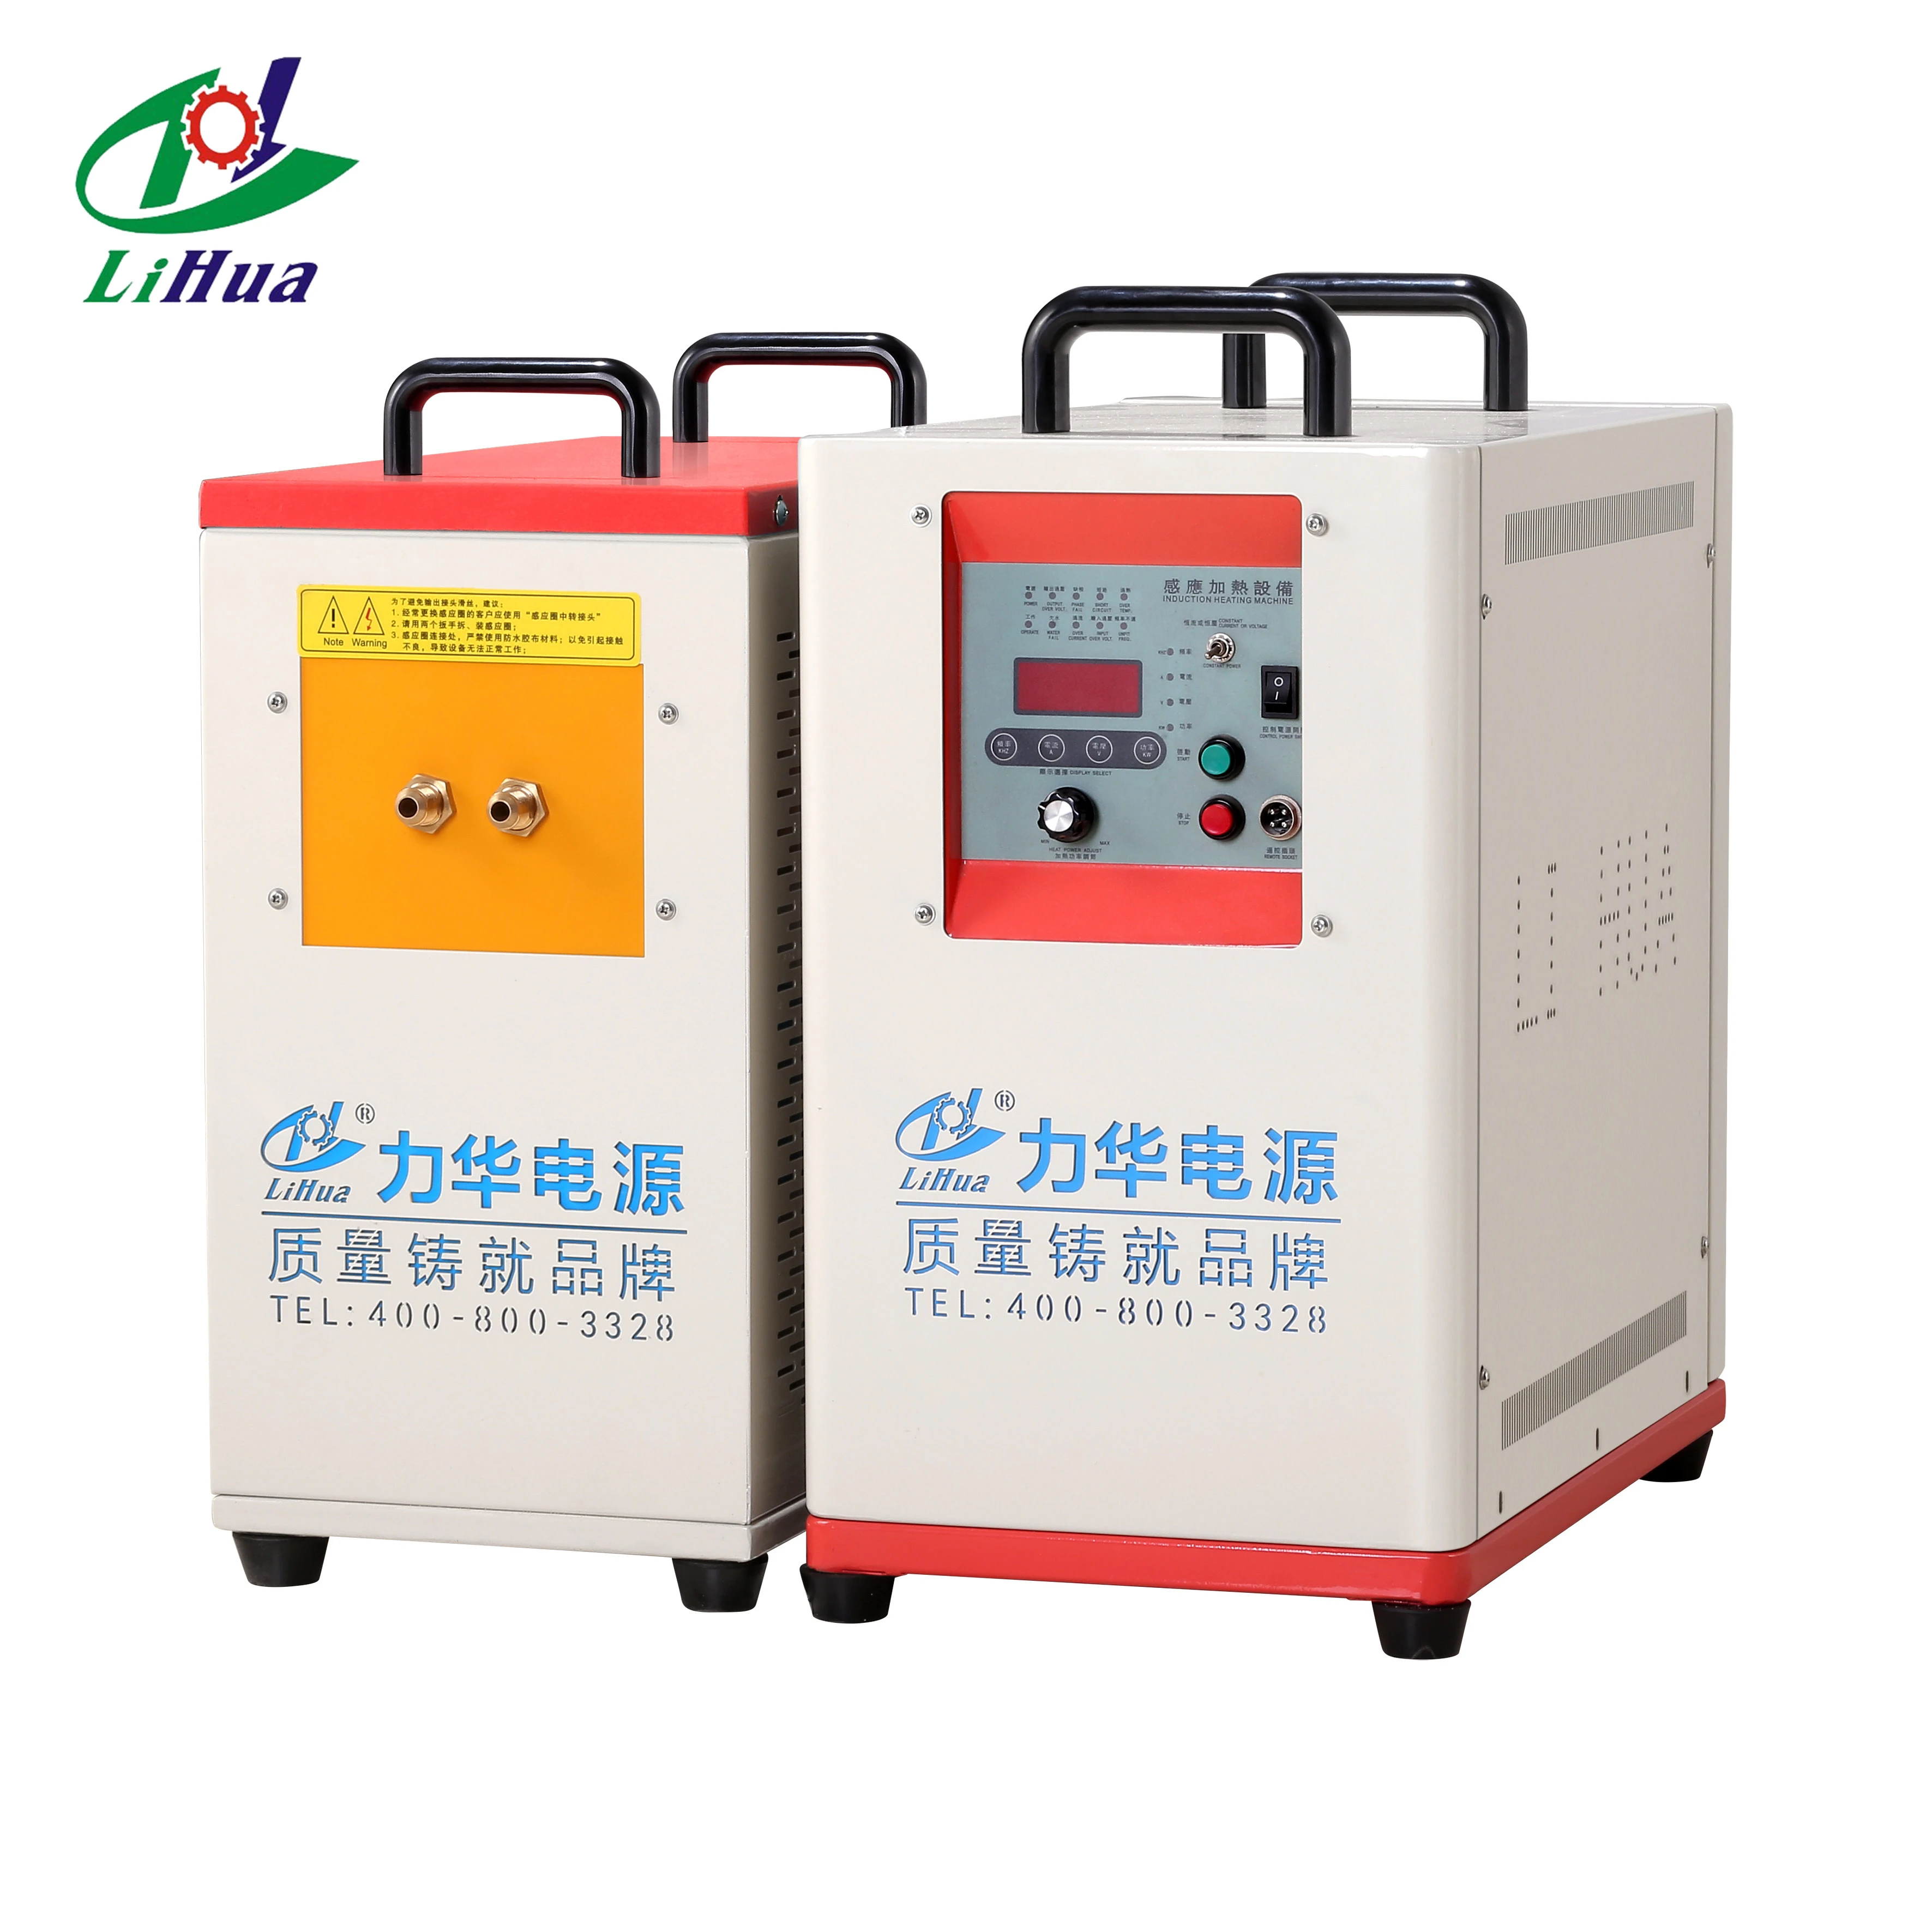 15KW medium frequency induction heating equipment